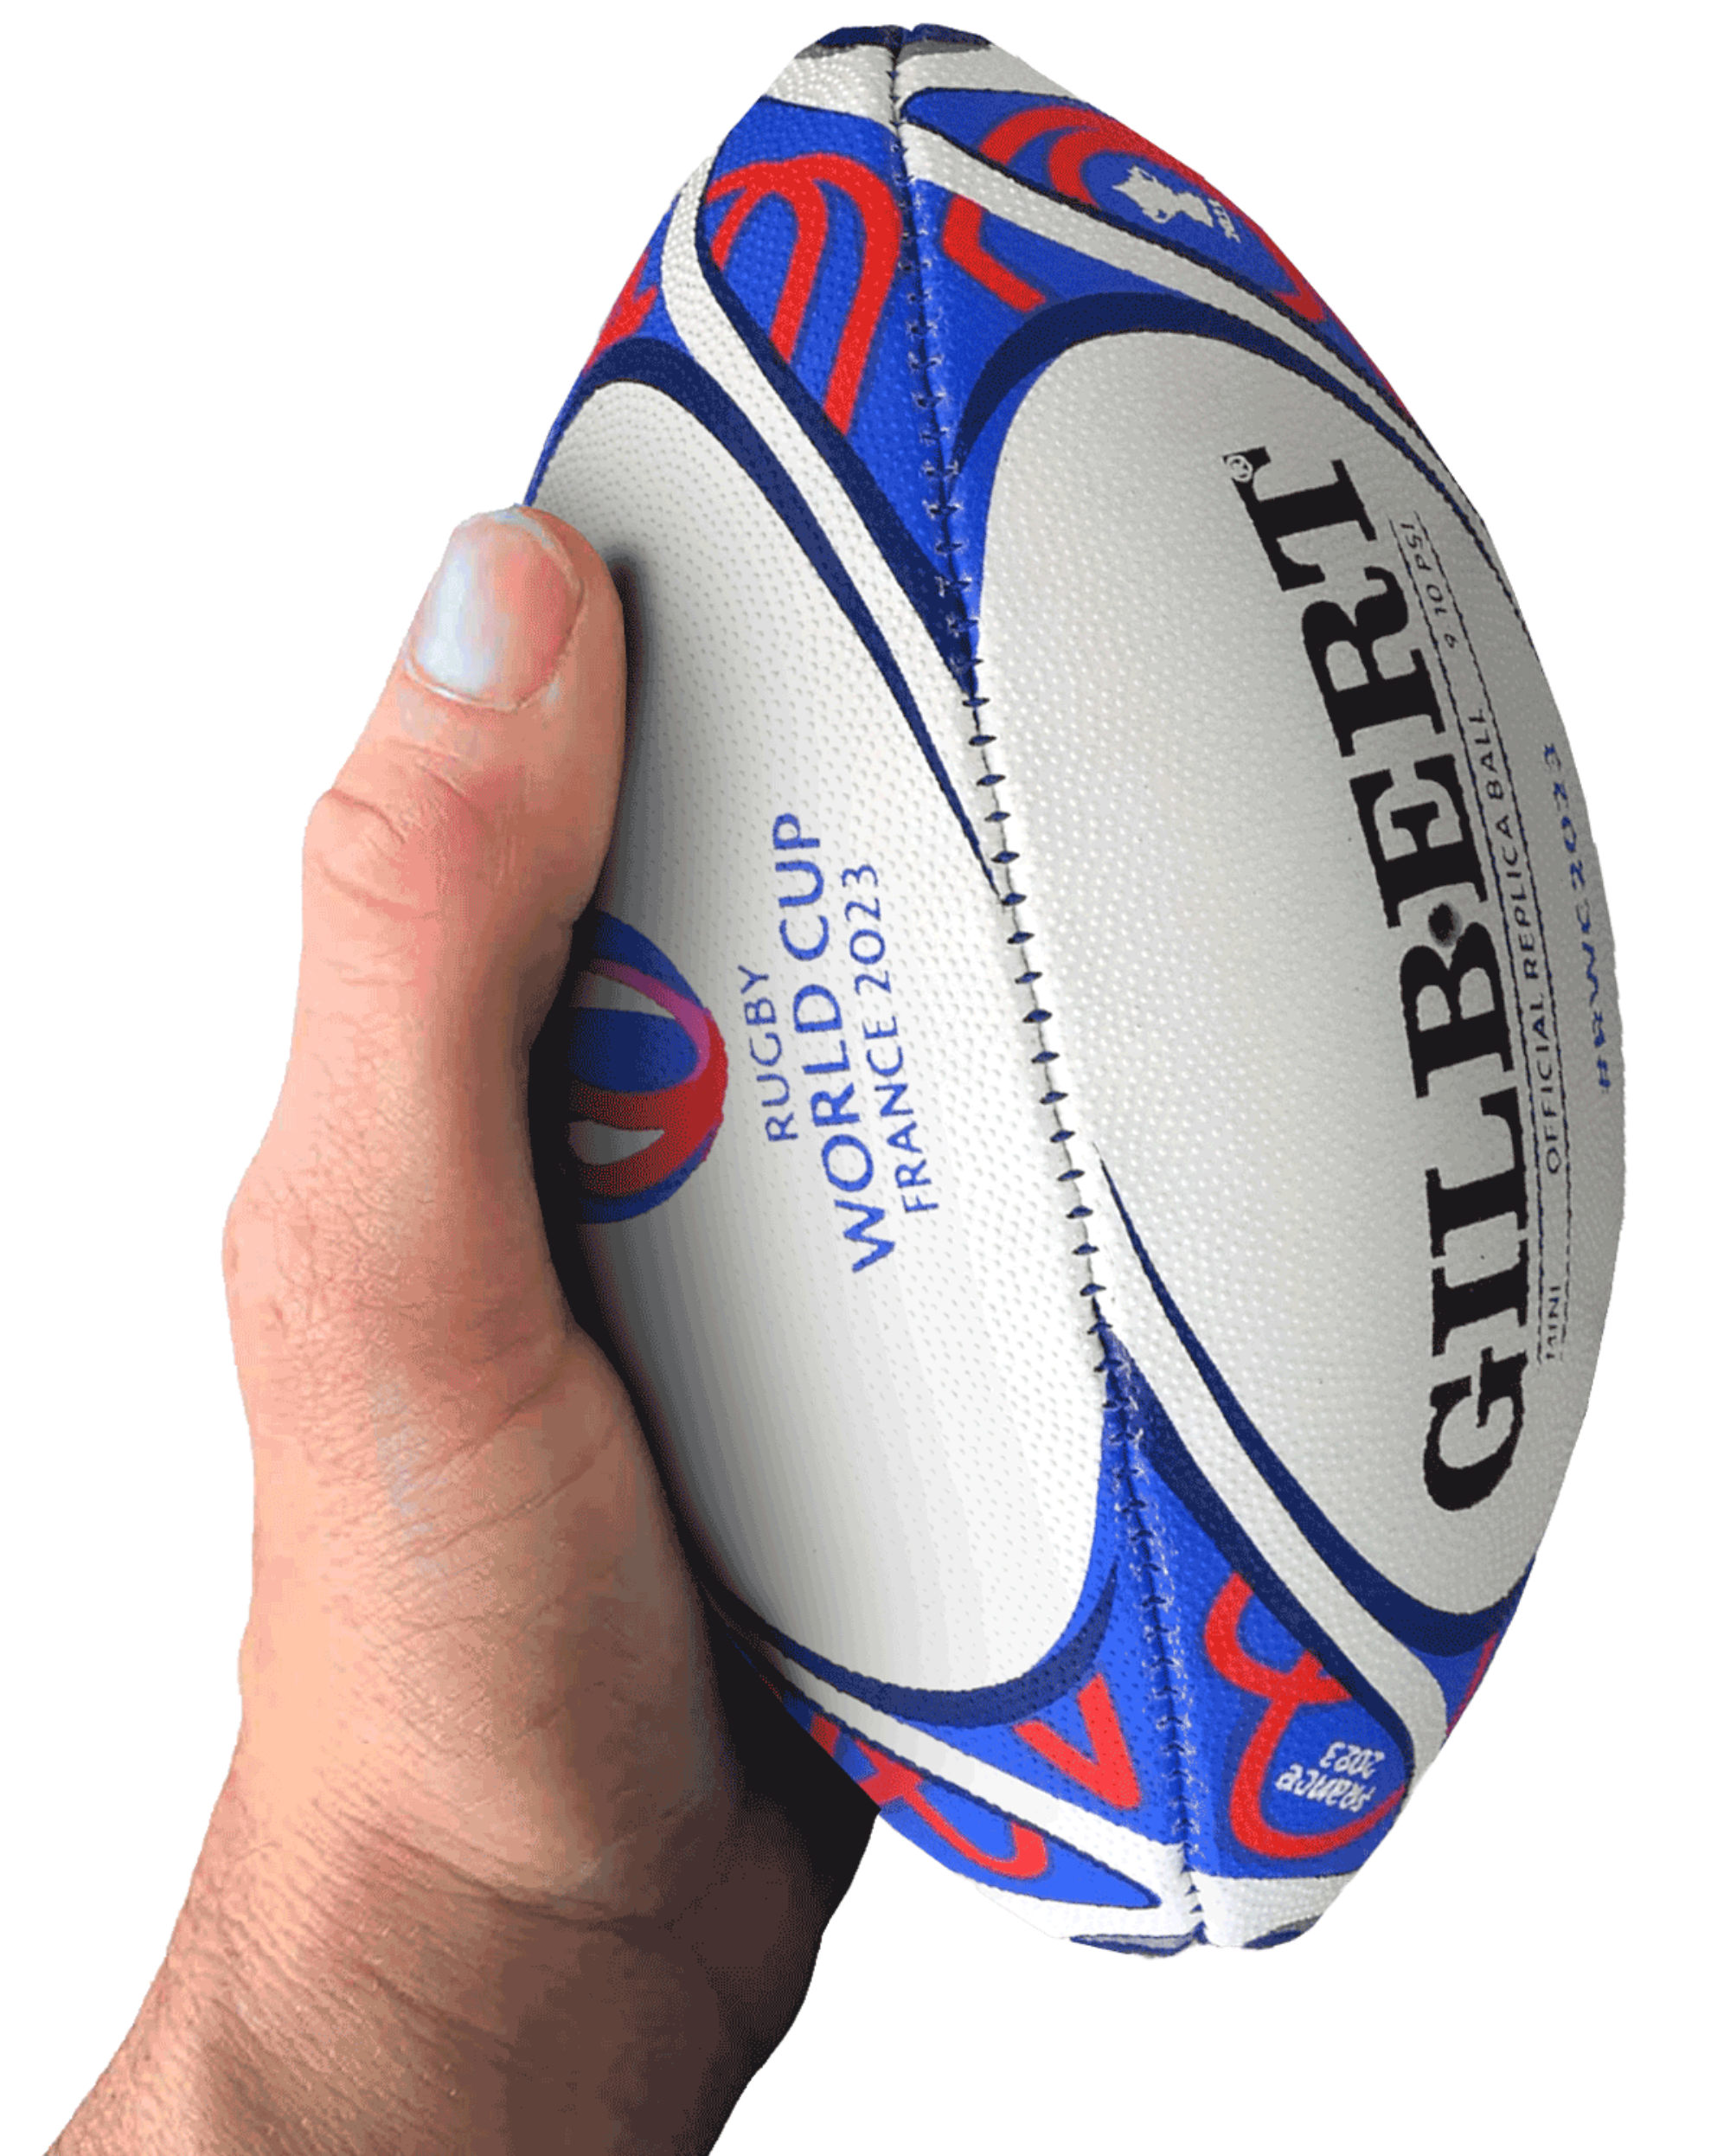 Rugby World Cup 23 Mini Rugby Ball by Gilbert | World Rugby Shop